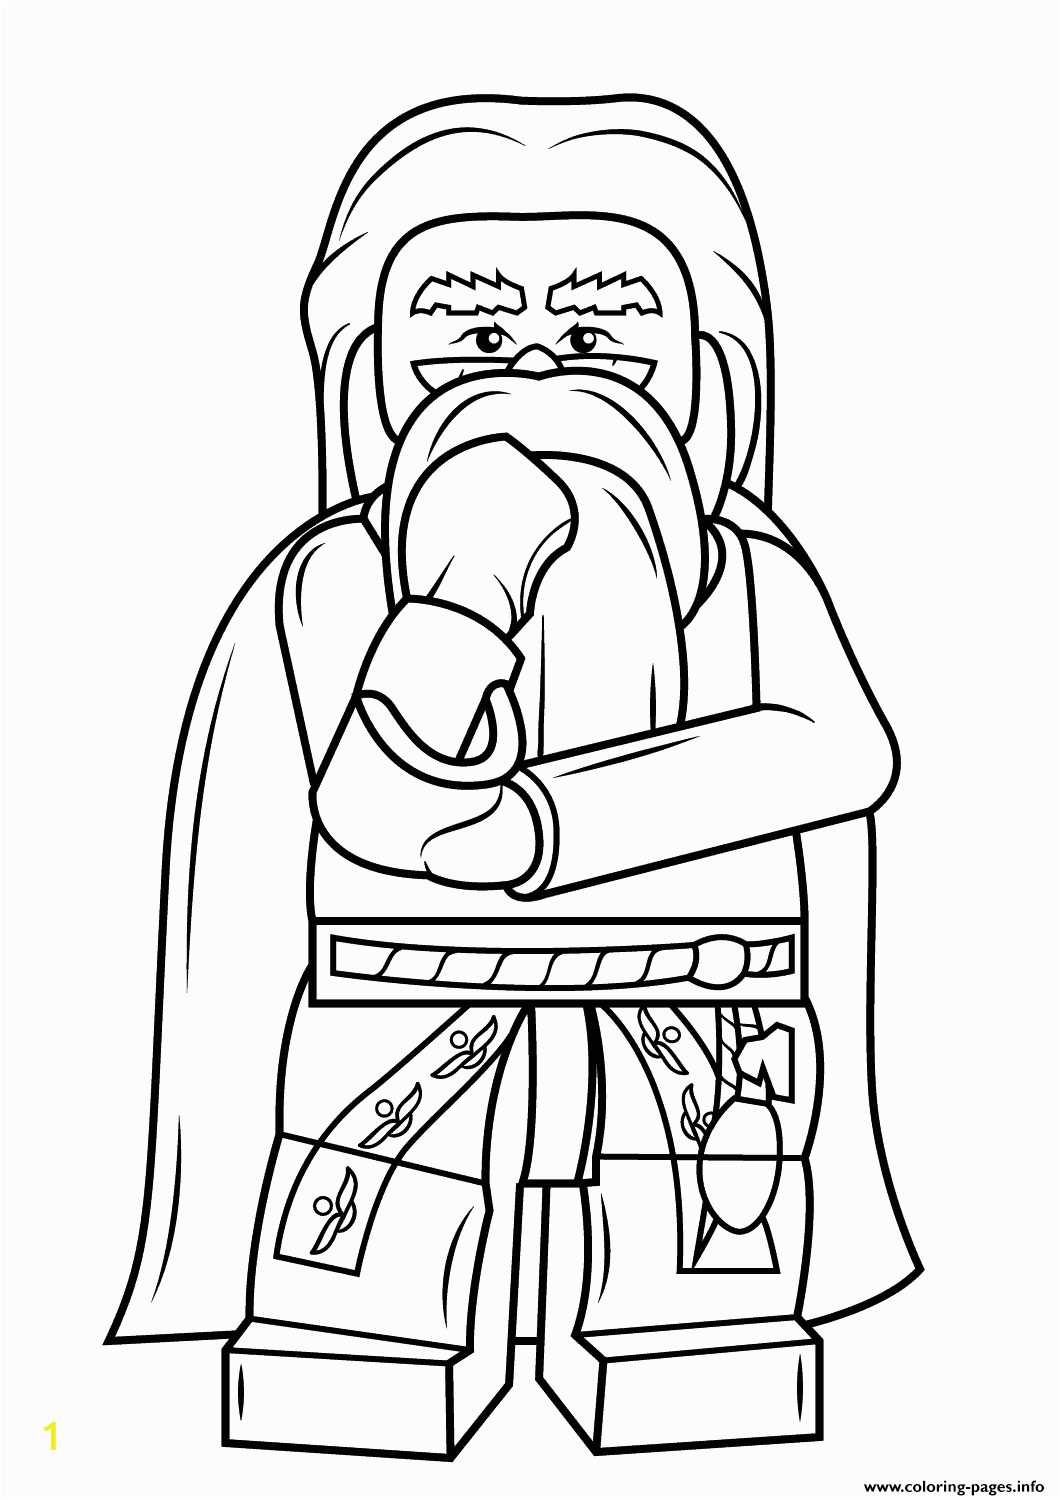 Lego Harry Potter Coloring Pages to Print Lego Albus Dumbledore Harry Potter Coloring Pages Printable